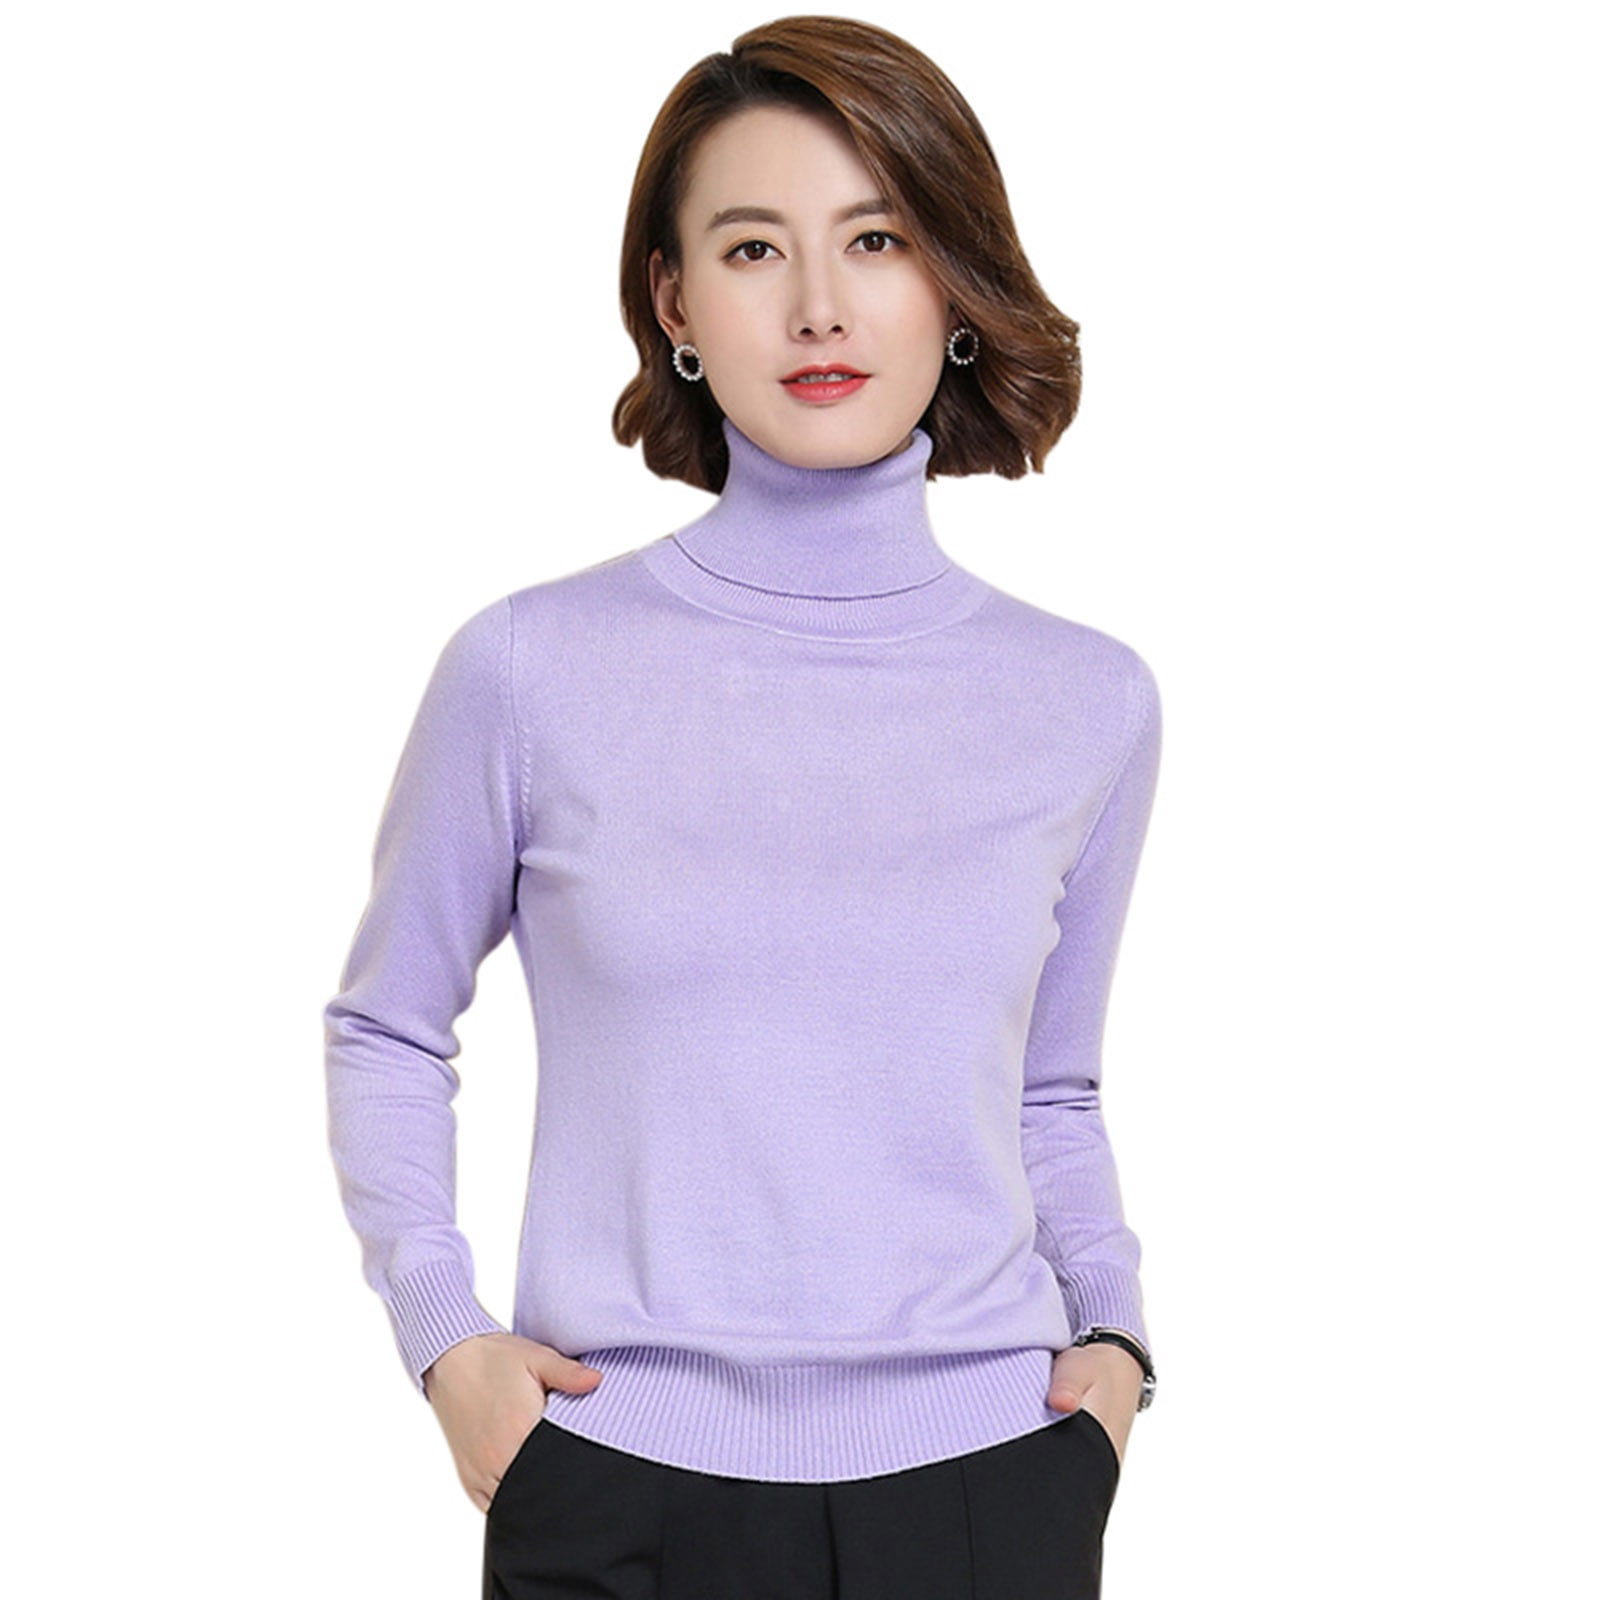 Women's Slim Knitted Turtleneck Cashmere Jumper Pullover Elasticity cozy Sweater